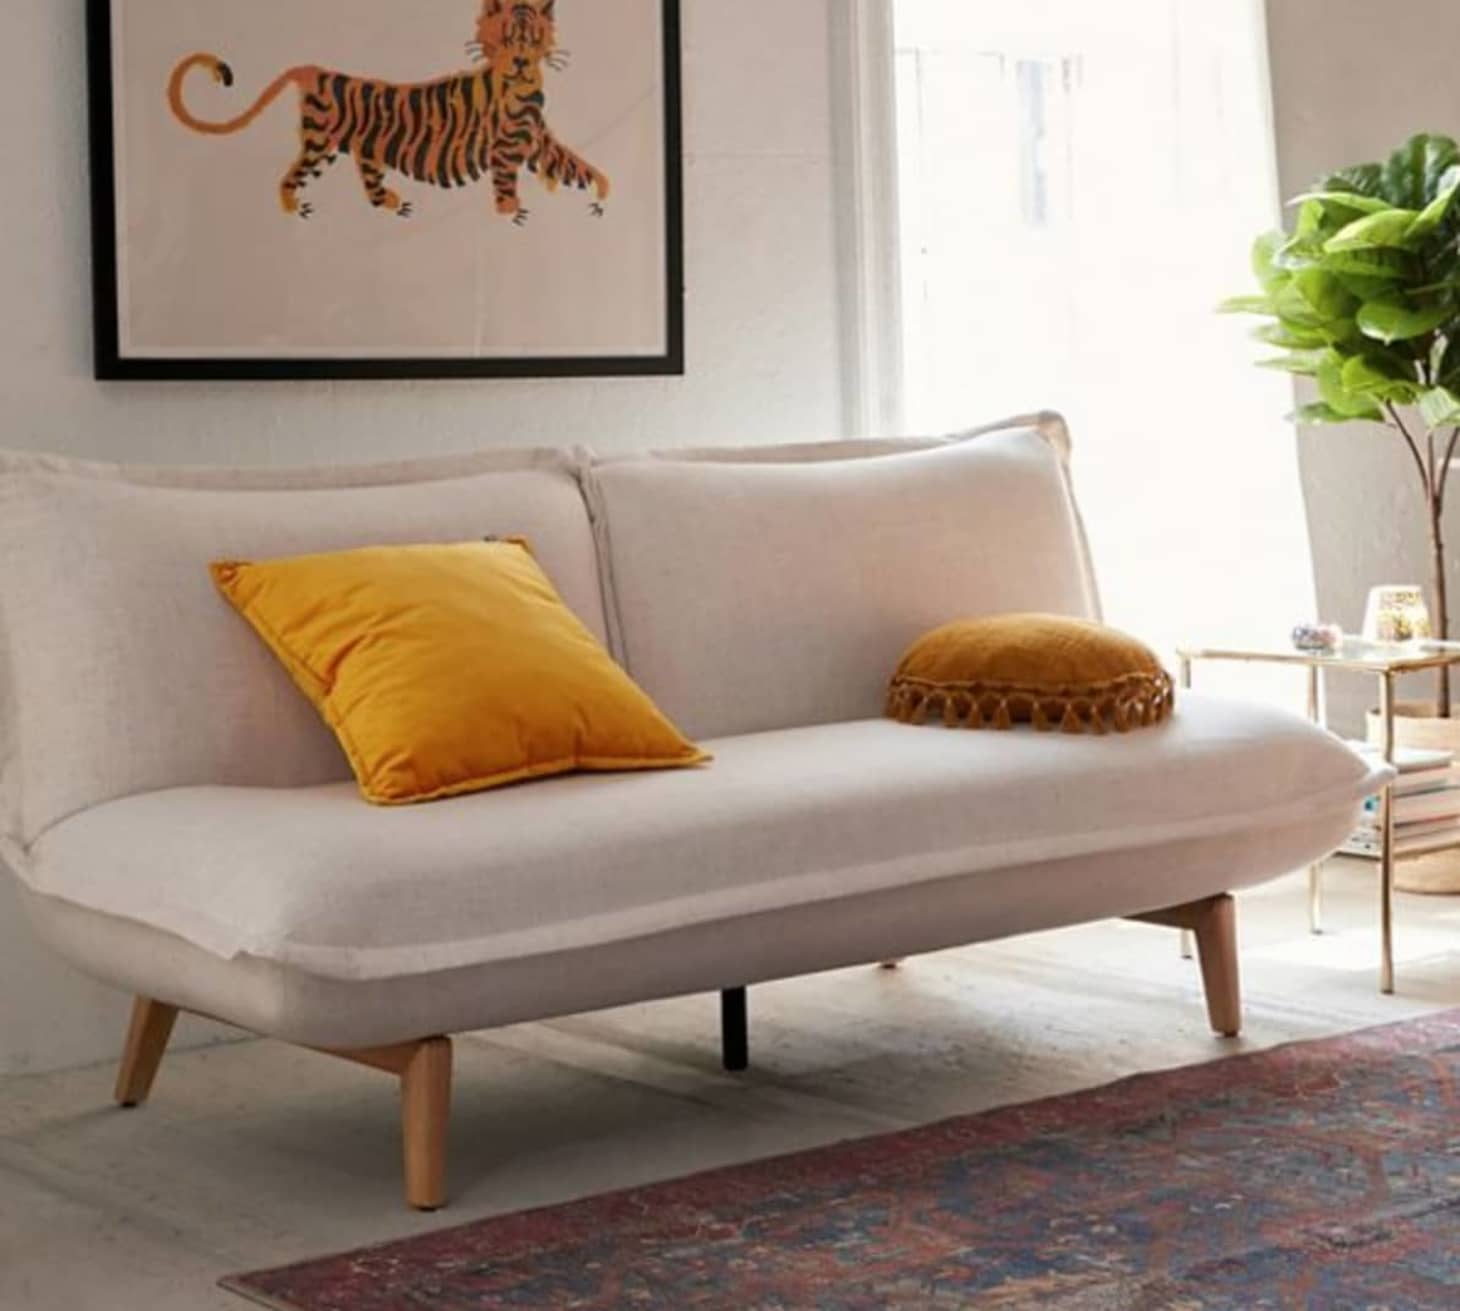 The Best Sleeper Sofas For Small Spaces | Apartment Therapy Within Sofas For Small Spaces (Gallery 1 of 20)